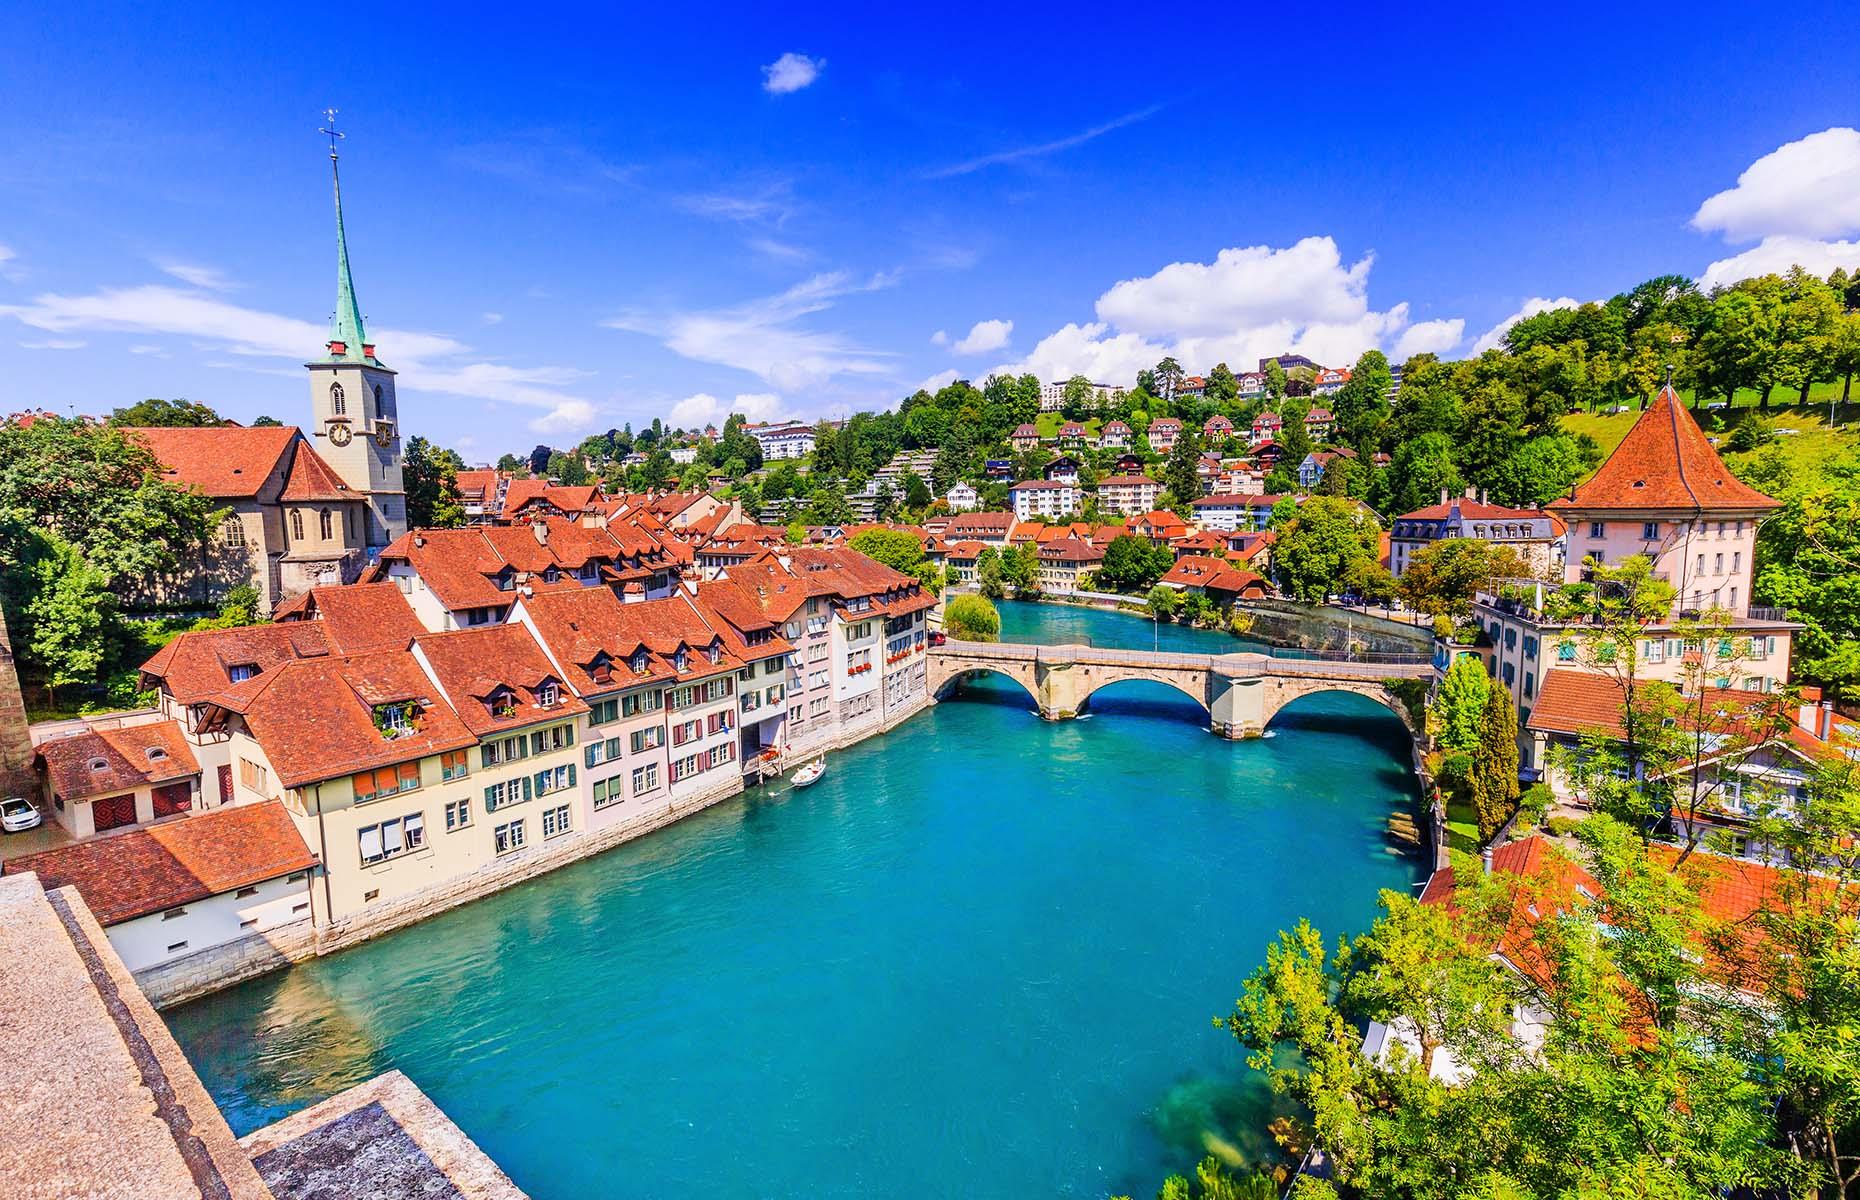 <p>With its well-preserved medieval old town, snow-covered Alpine backdrop and the pretty River Aare, Bern is a lovely city. The laid-back vibe means it doesn't feel like a bustling capital – and all the better for it. The arcaded streets of its UNESCO-listed historic area are perfect for pottering, with plenty of small shops and cafés. Top attractions include the Zytglogge (clocktower), <a href="https://www.bern.com/en/detail/the-bern-minster">Gothic Bern Minster</a>, <a href="https://www.kunstmuseumbern.ch/en/startseite-englisch-121.html">Museum of Fine Arts</a>, <a href="https://www.bern.com/en/detail/einstein-house">Einstein House</a> and the <a href="https://www.bhm.ch/en/exhibitions/einstein-museum/">Einstein Museum</a>.</p>